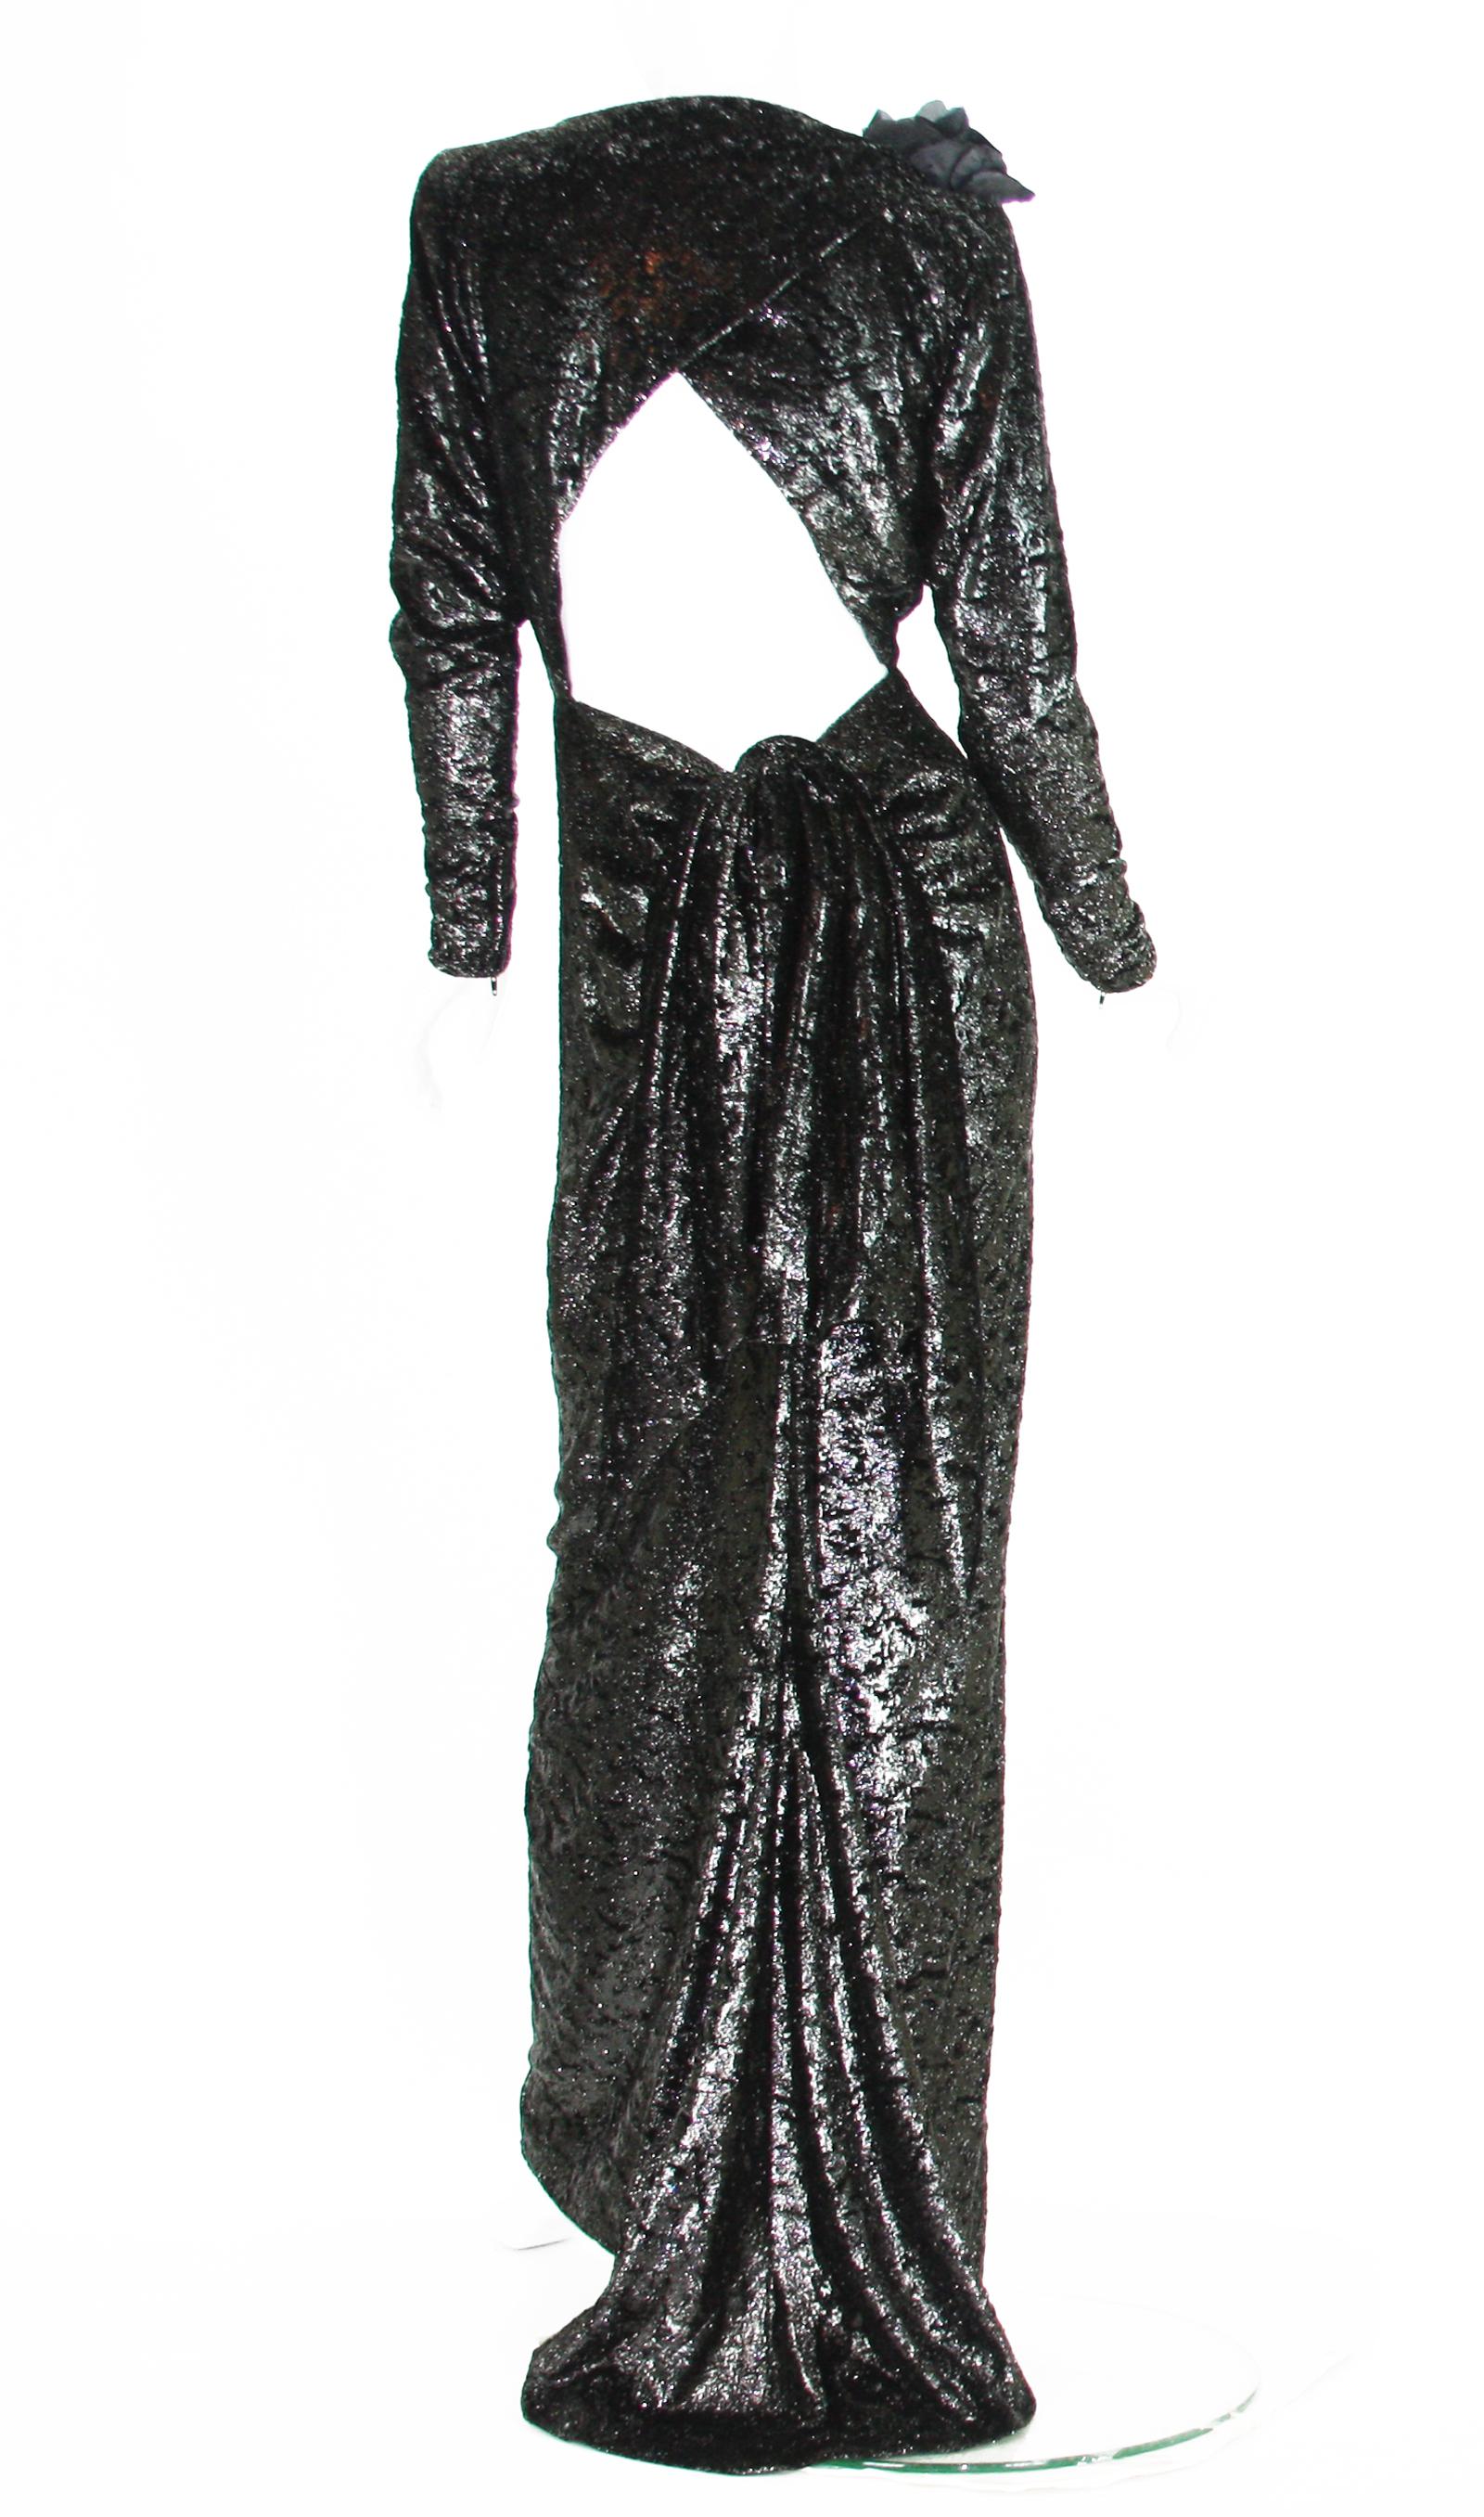 Women's Rare 2 in 1 Yves Saint Laurent Couture Crushed Velvet Numbered Dress c. 1986 For Sale